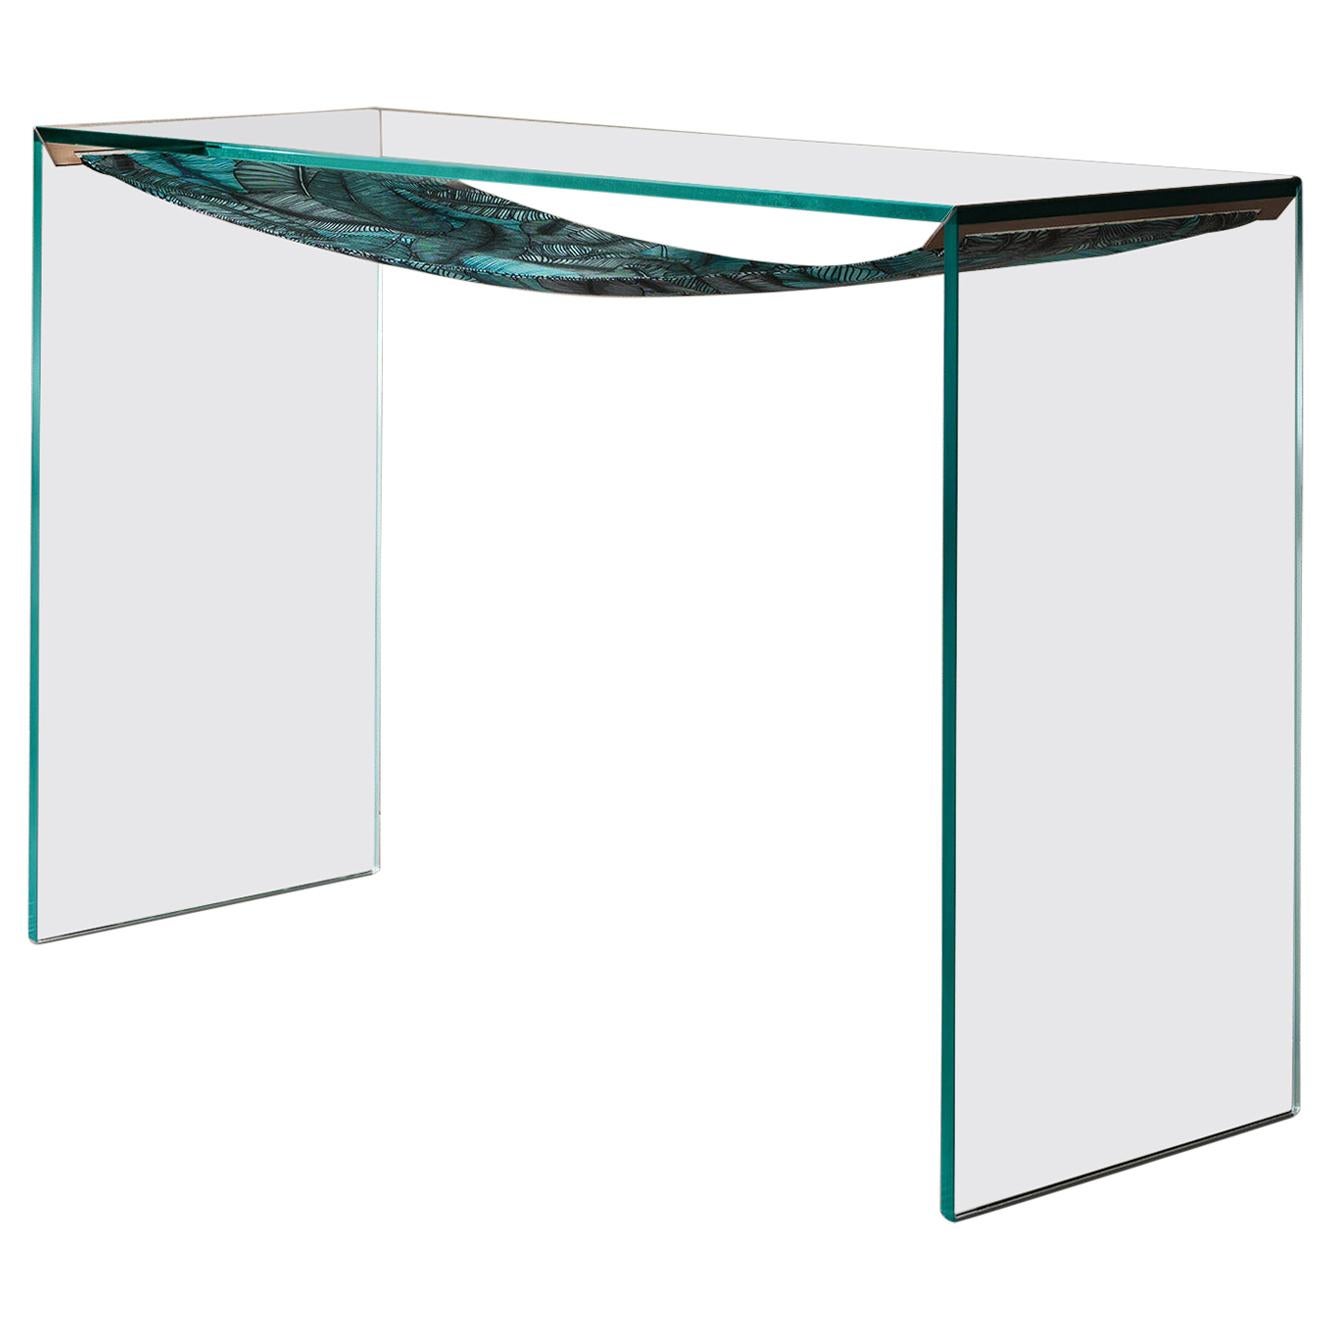 Green Leaves Console Table